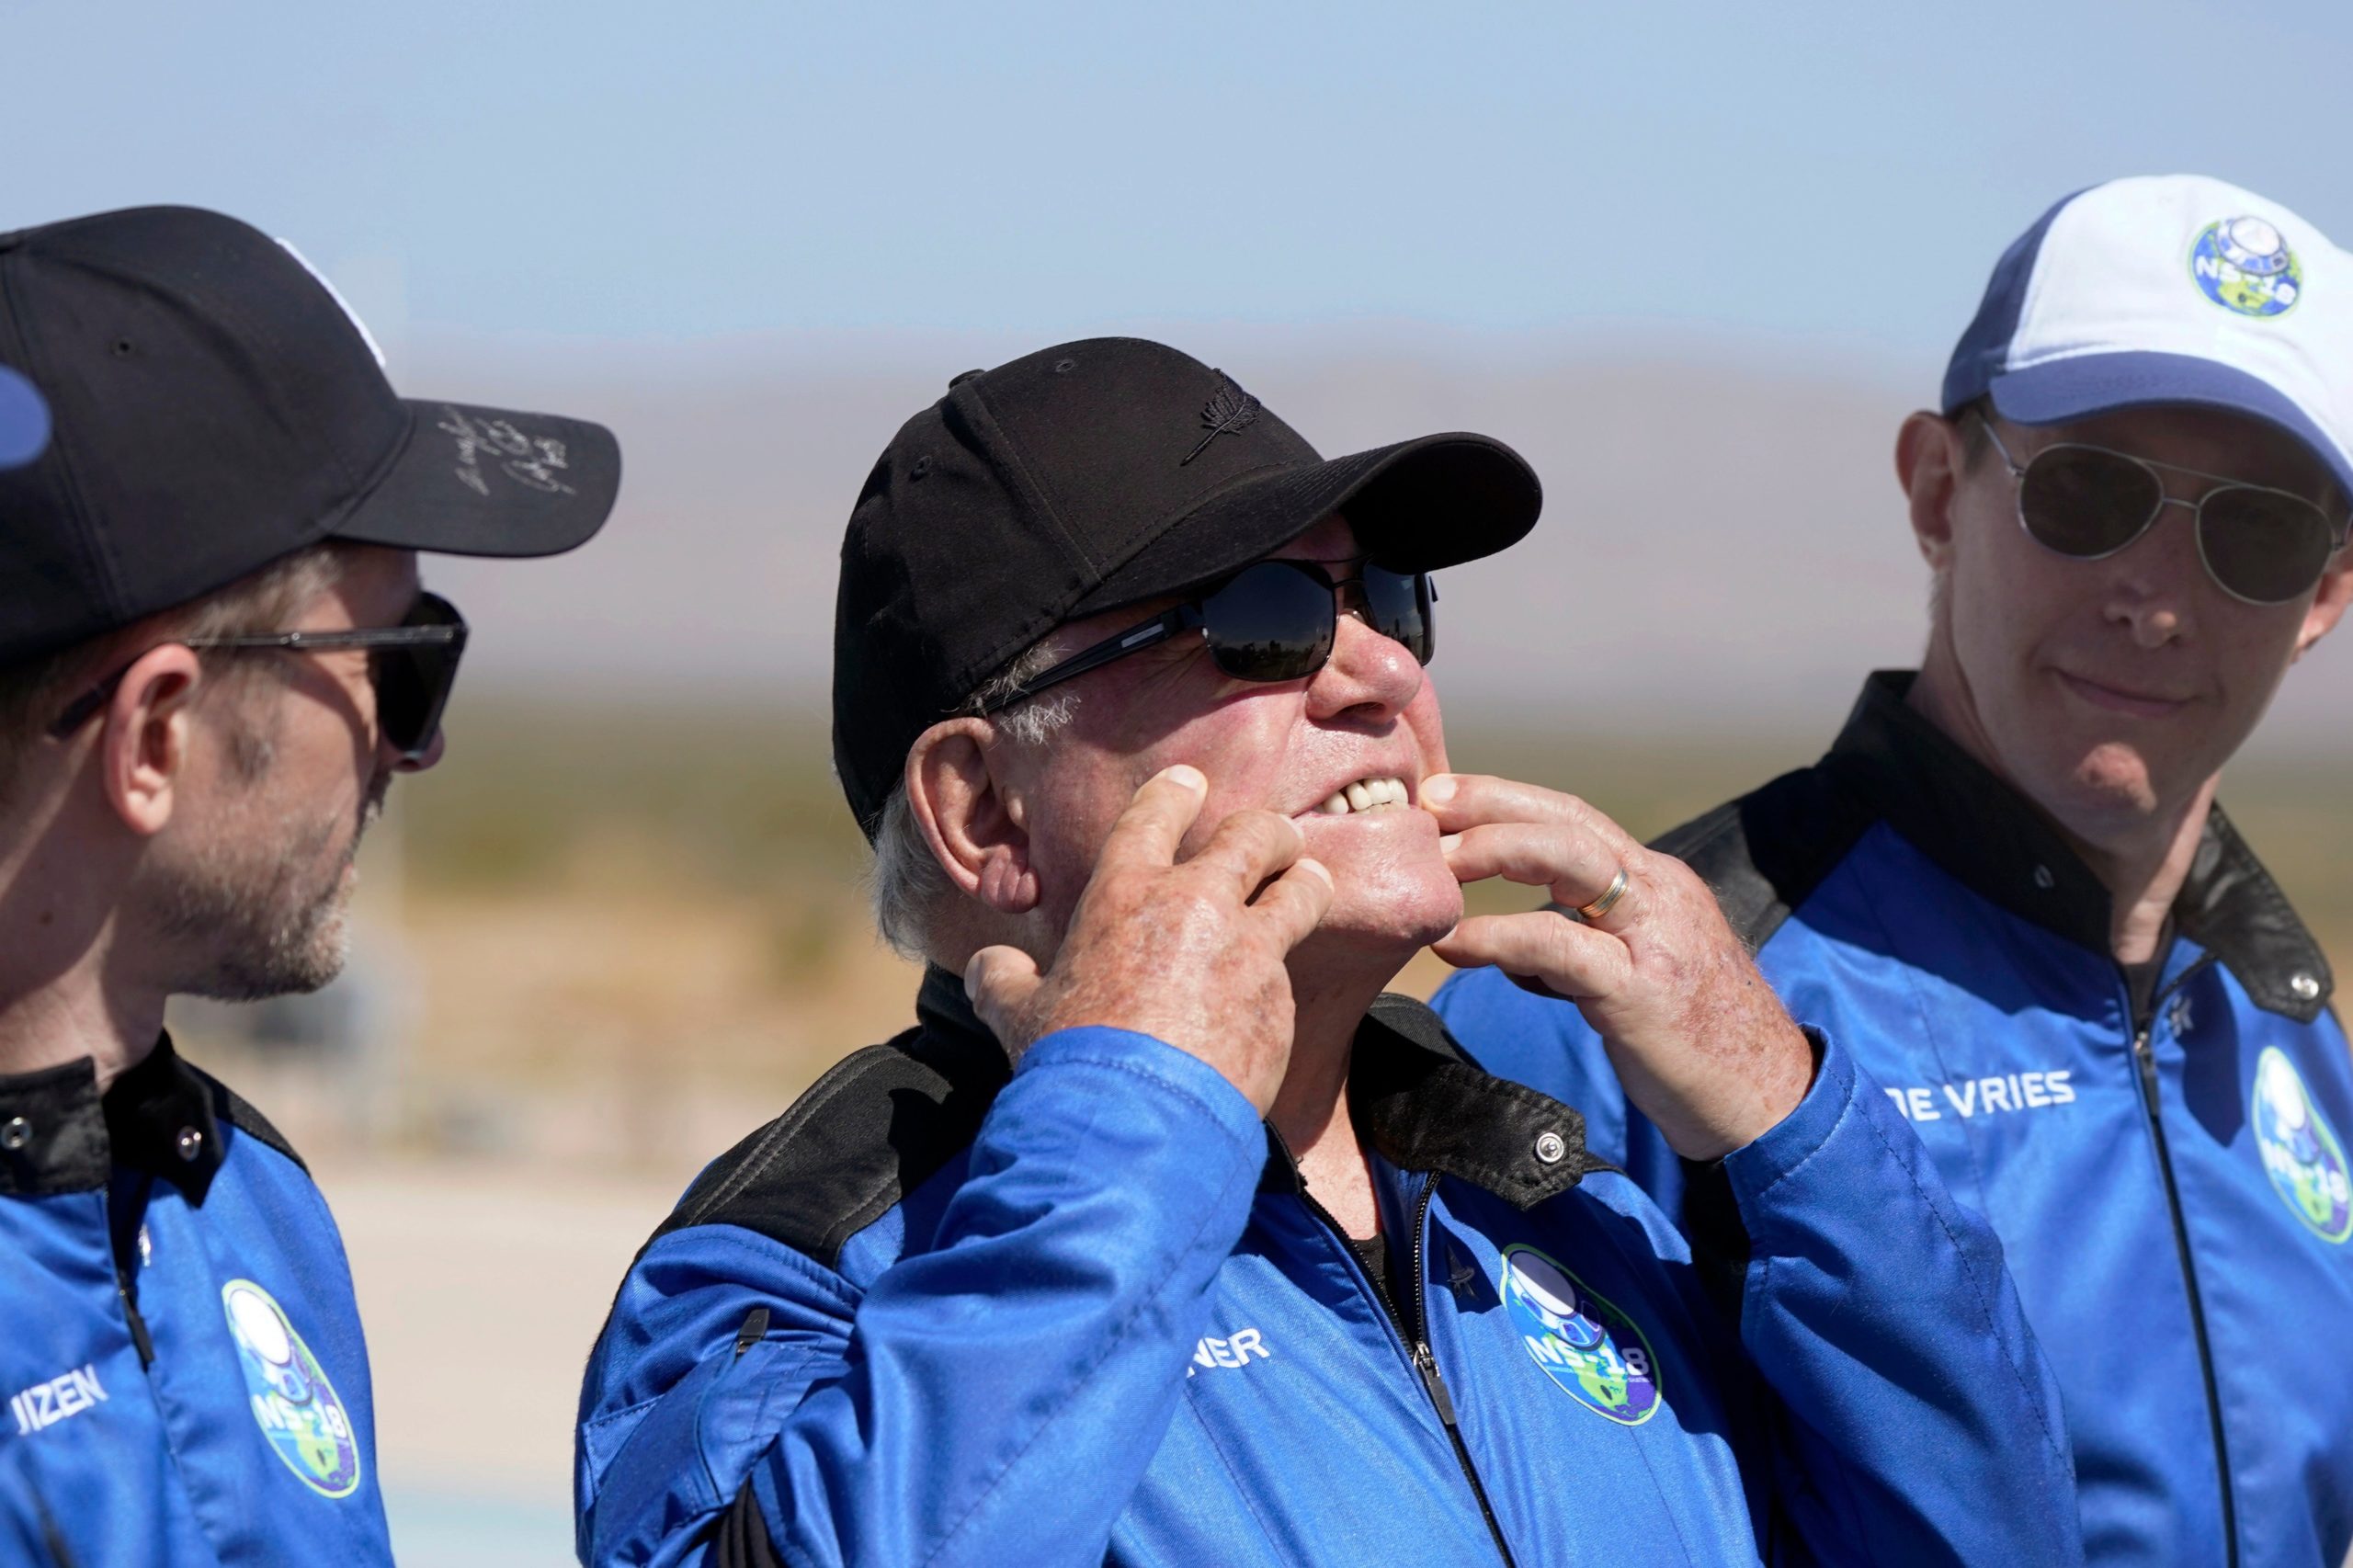 William Shatner (centre) describing what the g-forces did to his face during launch. Entrepreneur Glen de Vries (right) was tragically killed in a plane crash several weeks later. (Photo: LM Otero, AP)